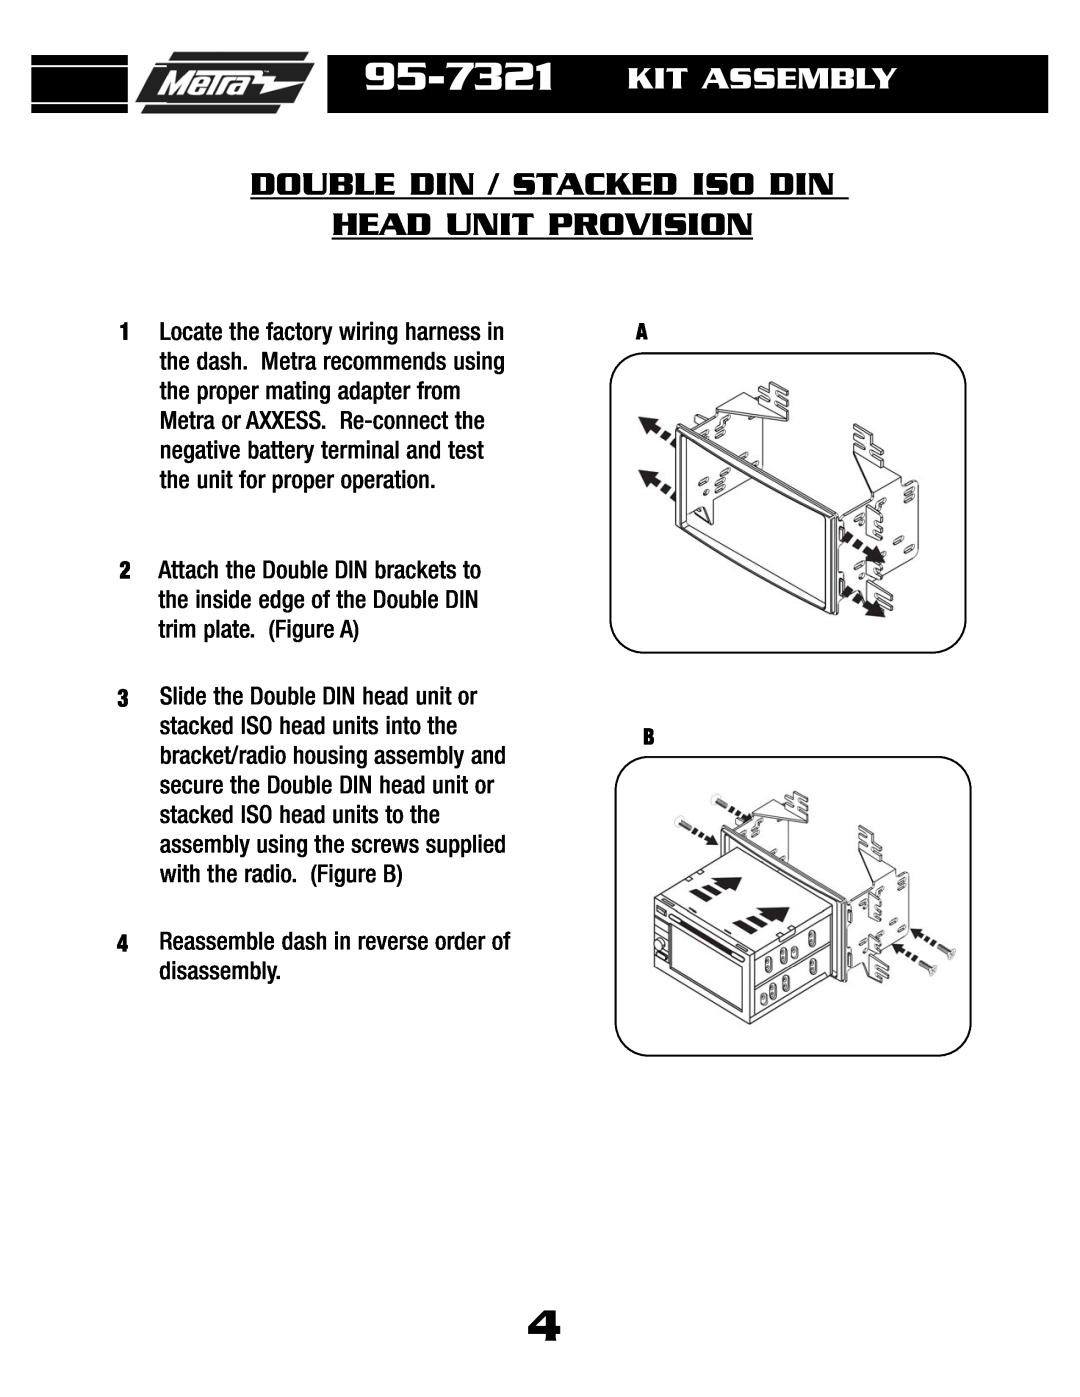 Metra Electronics 95-7321 installation instructions Double Din / Stacked Iso Din Head Unit Provision, Kit Assembly 